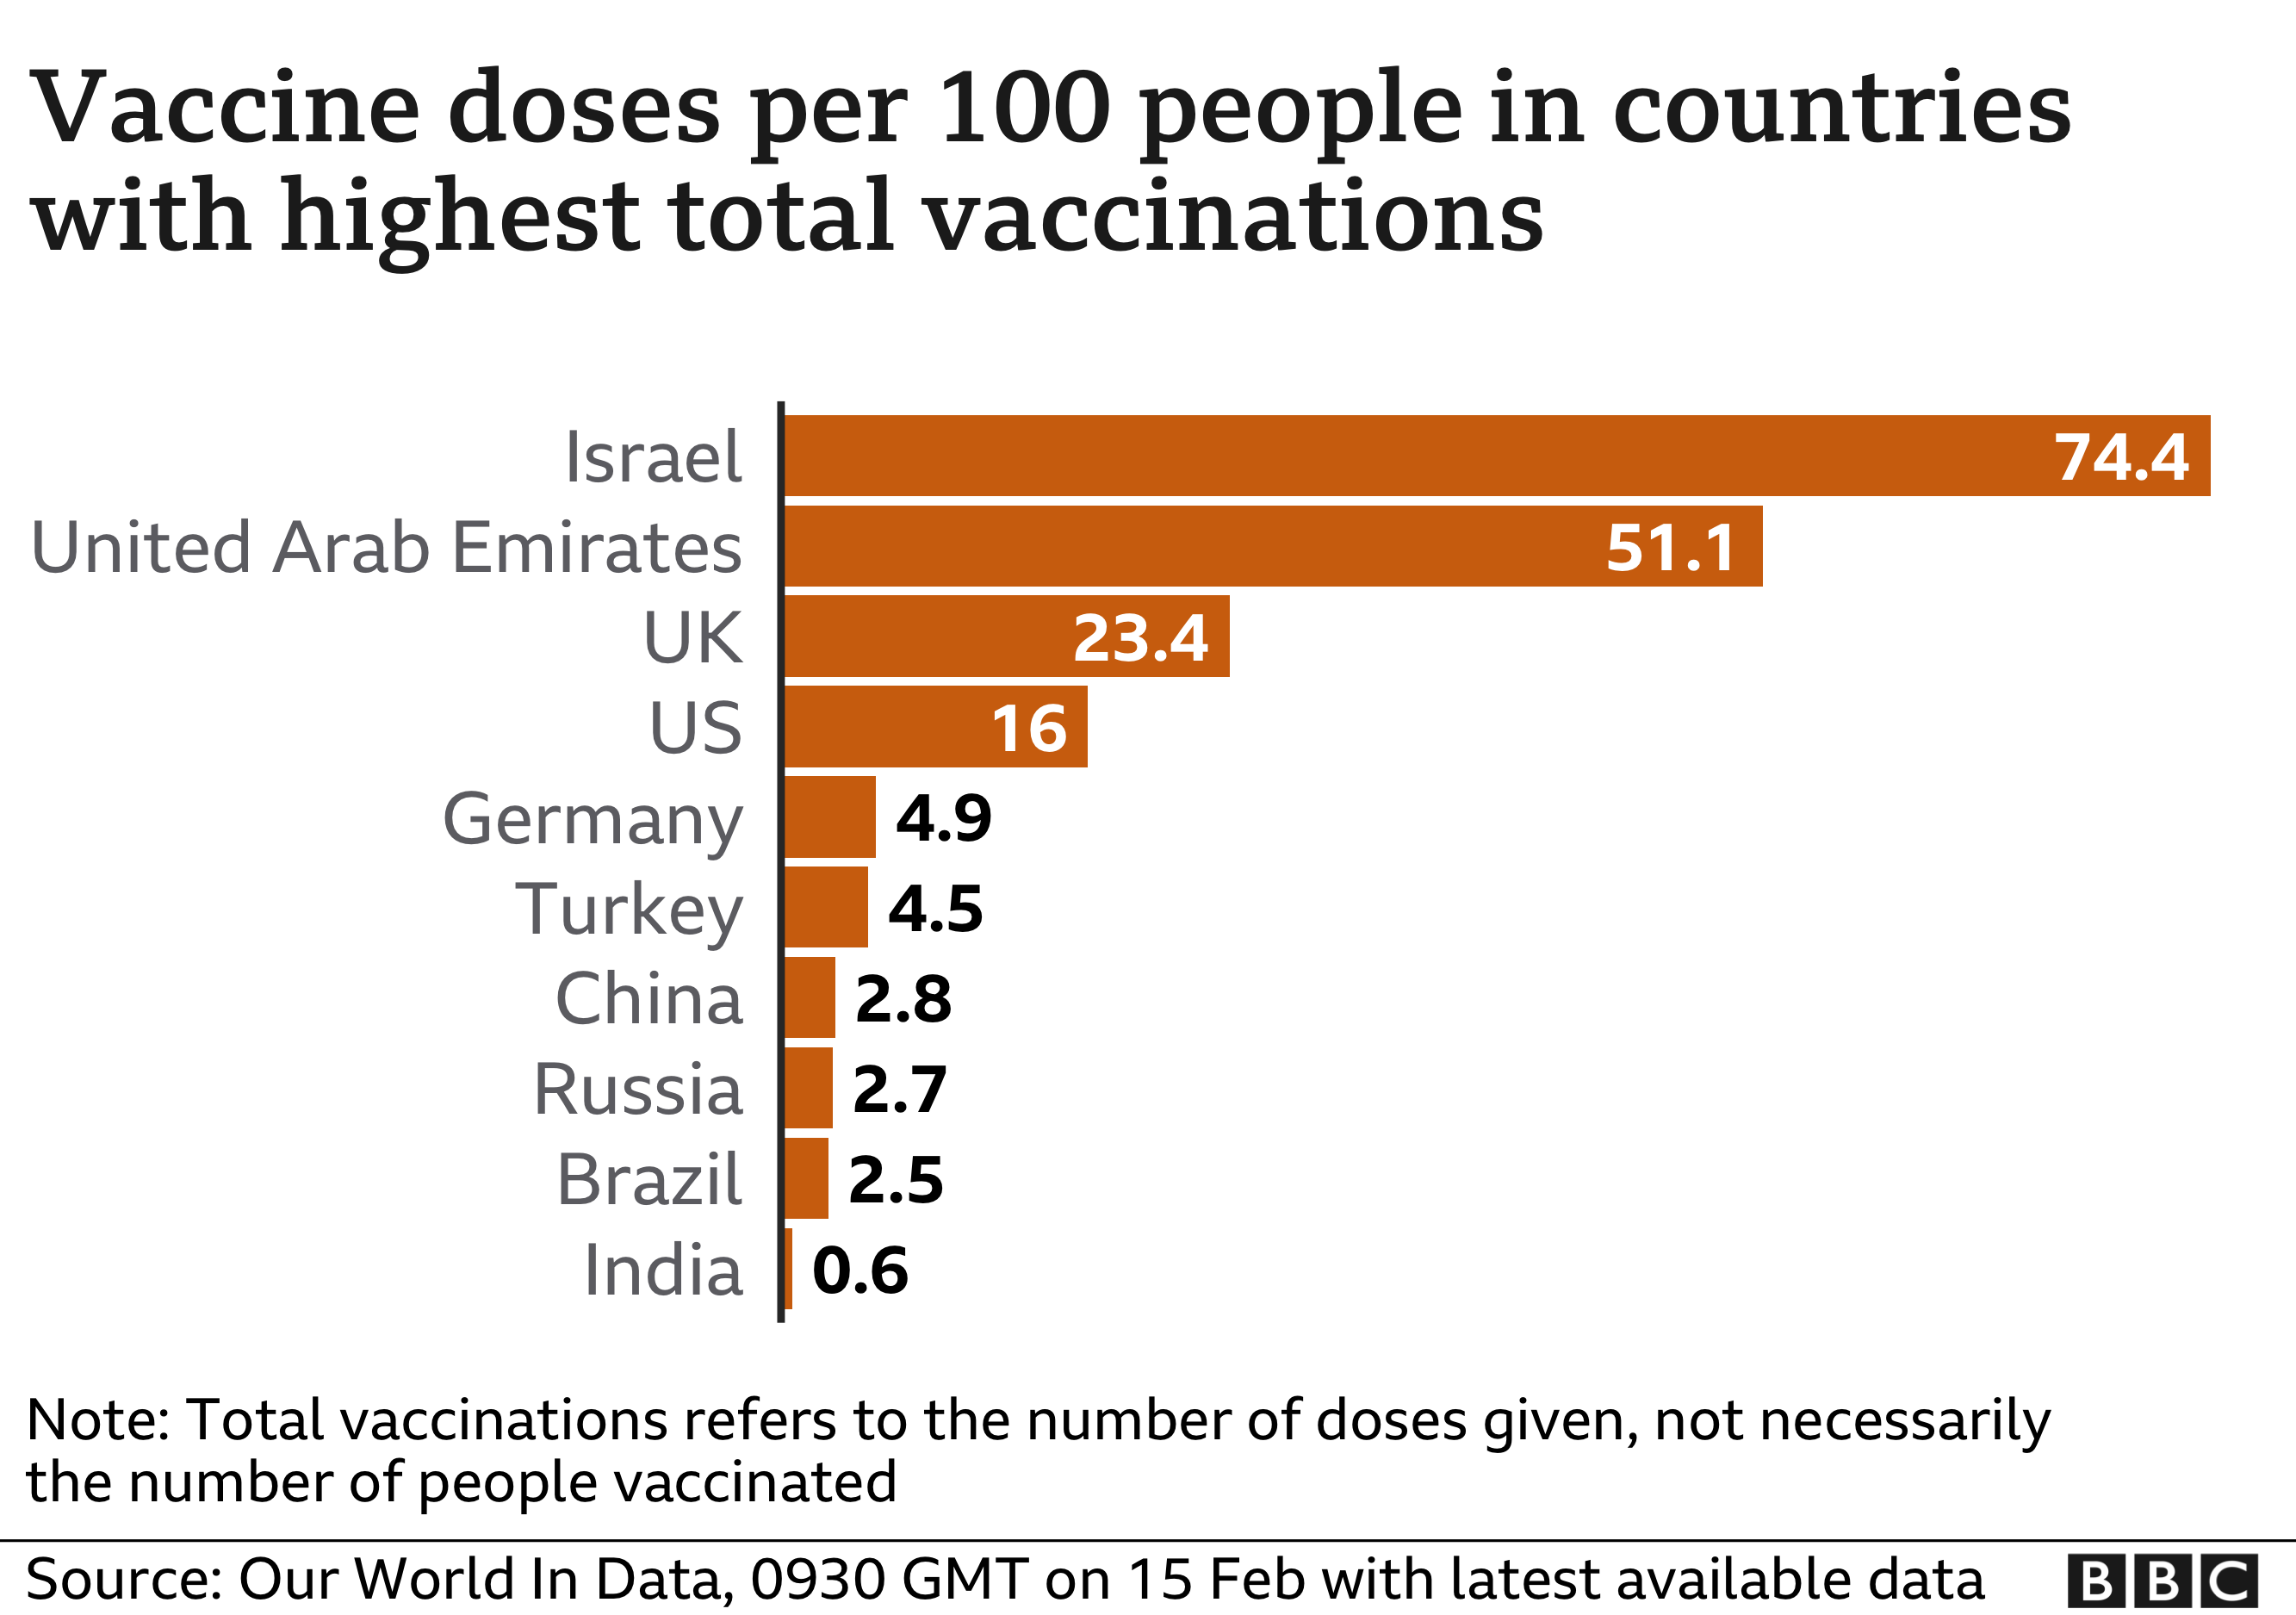 Chart showing vaccine doses per 100 people in countries with the highest total vaccinations